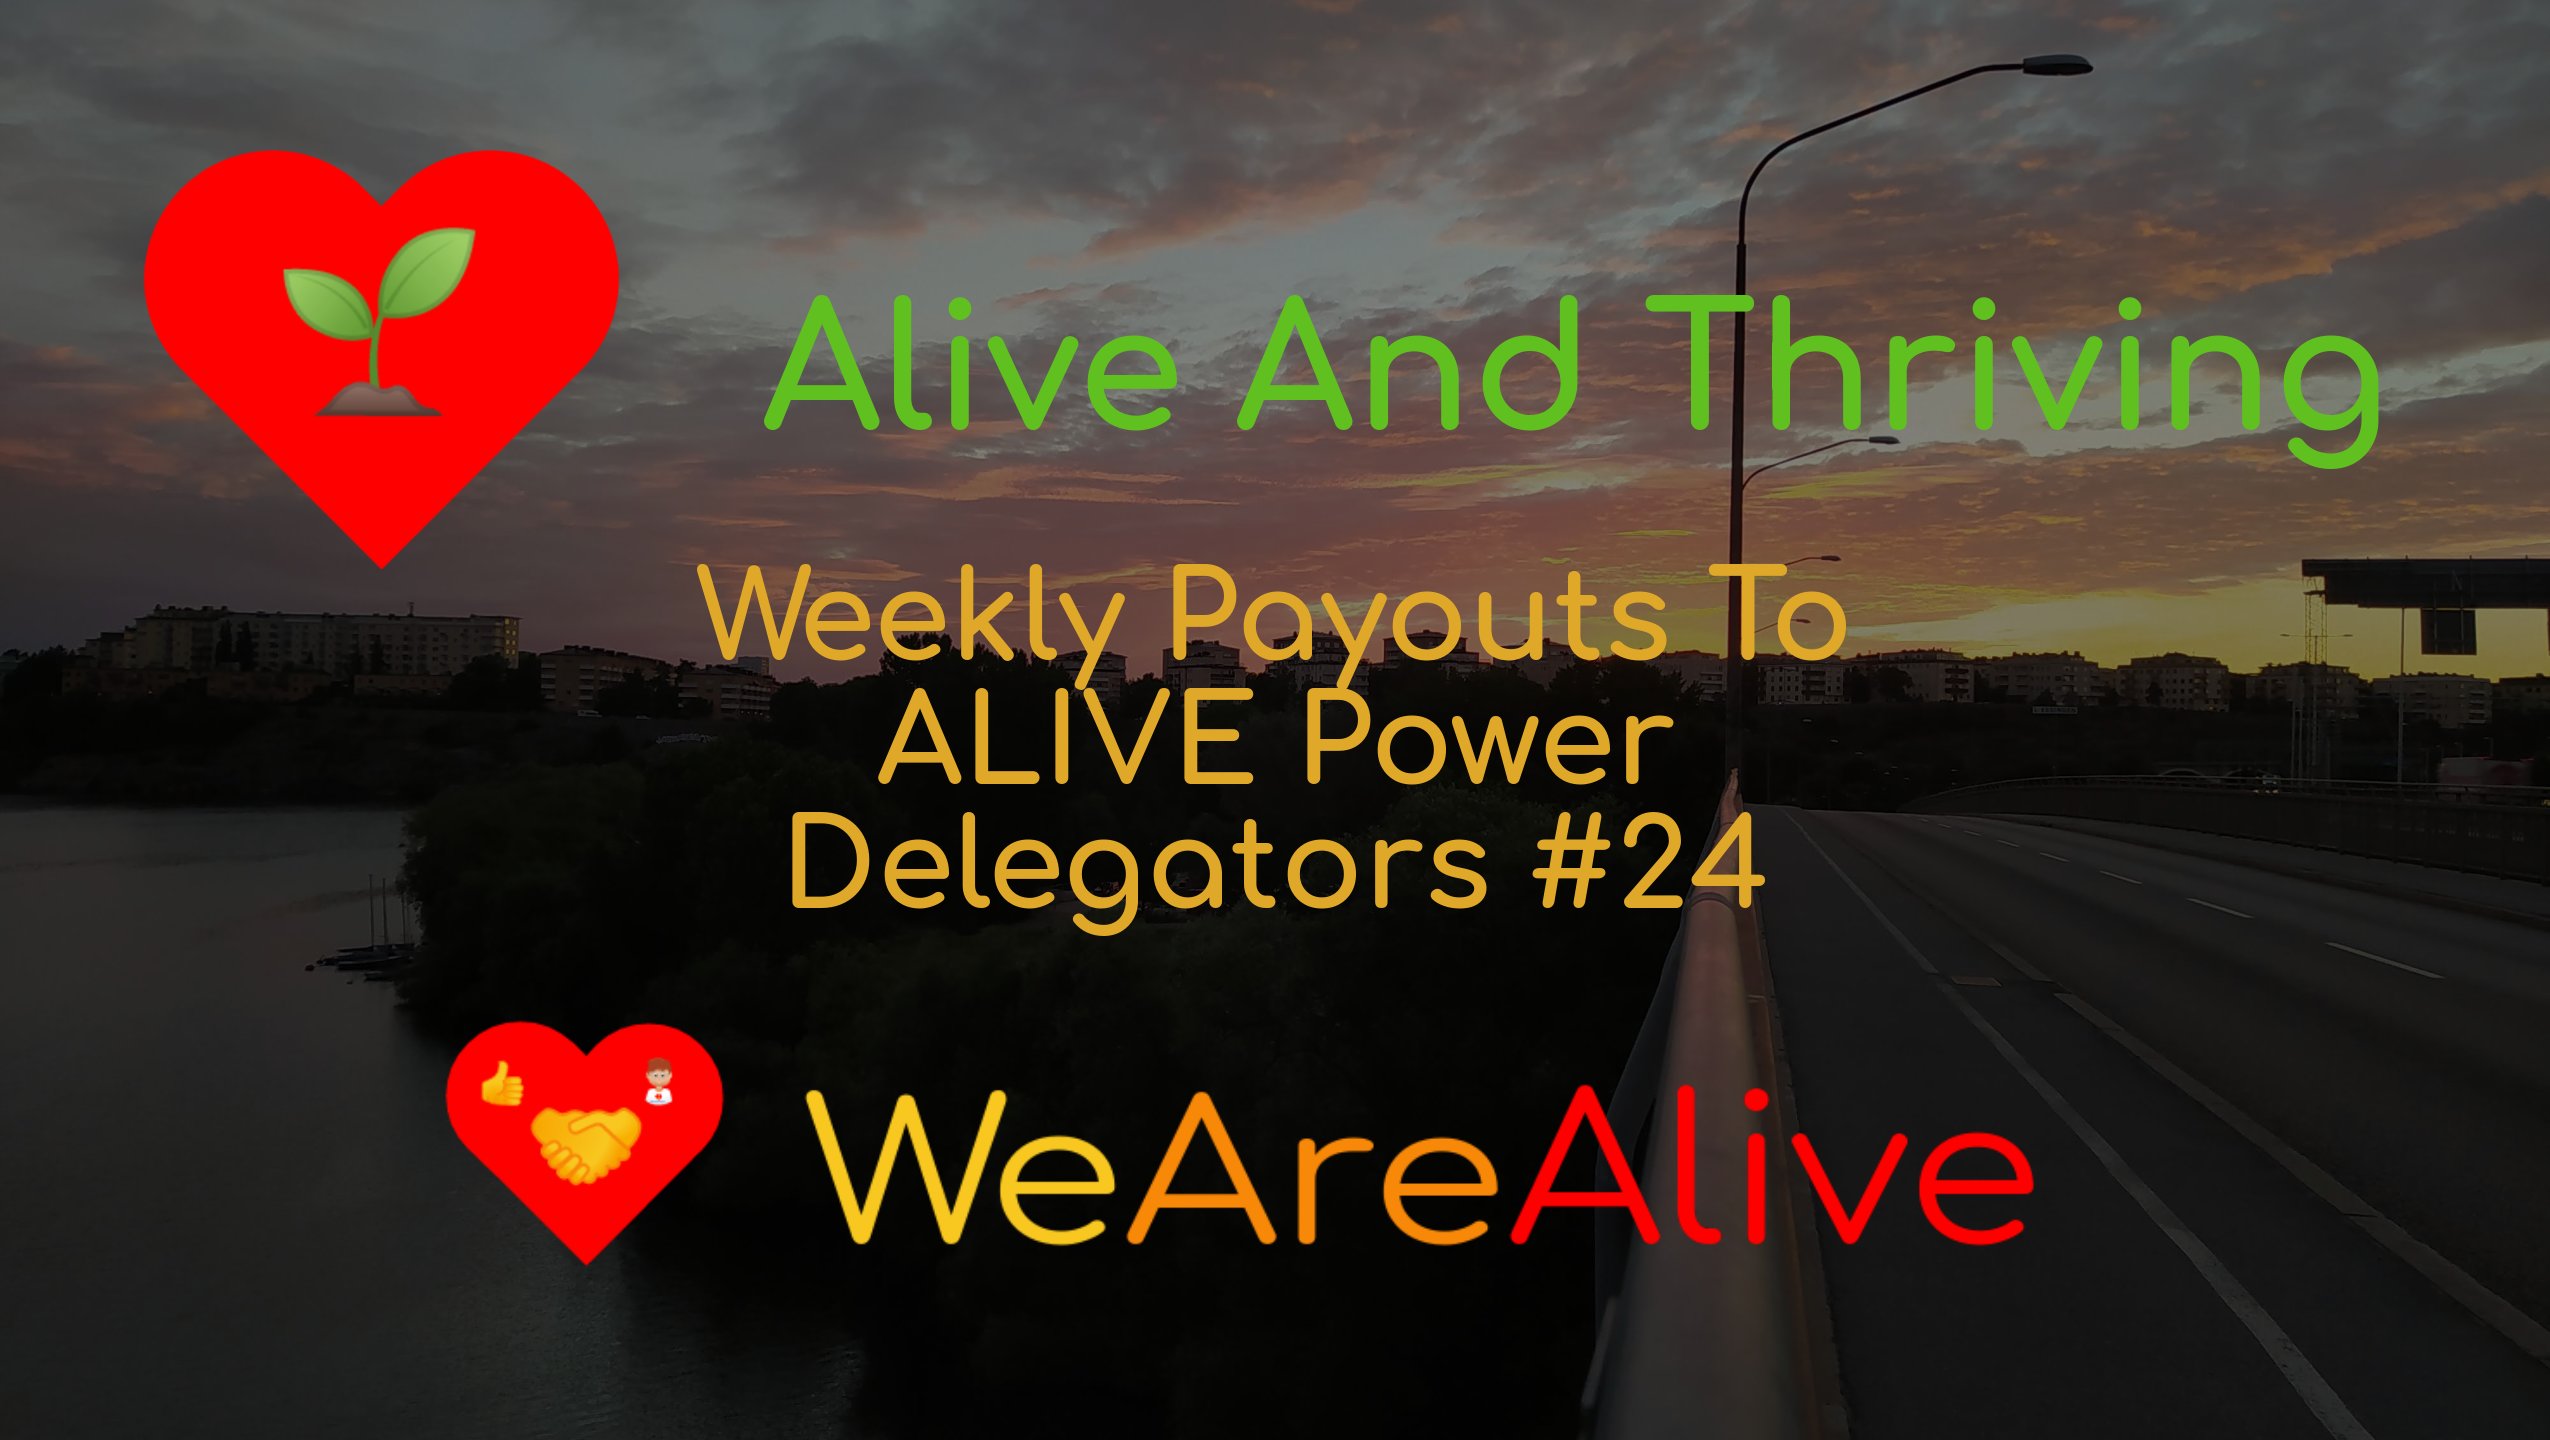 @wearealive/alive-and-thriving-weekly-payouts-to-alive-power-delegators-24